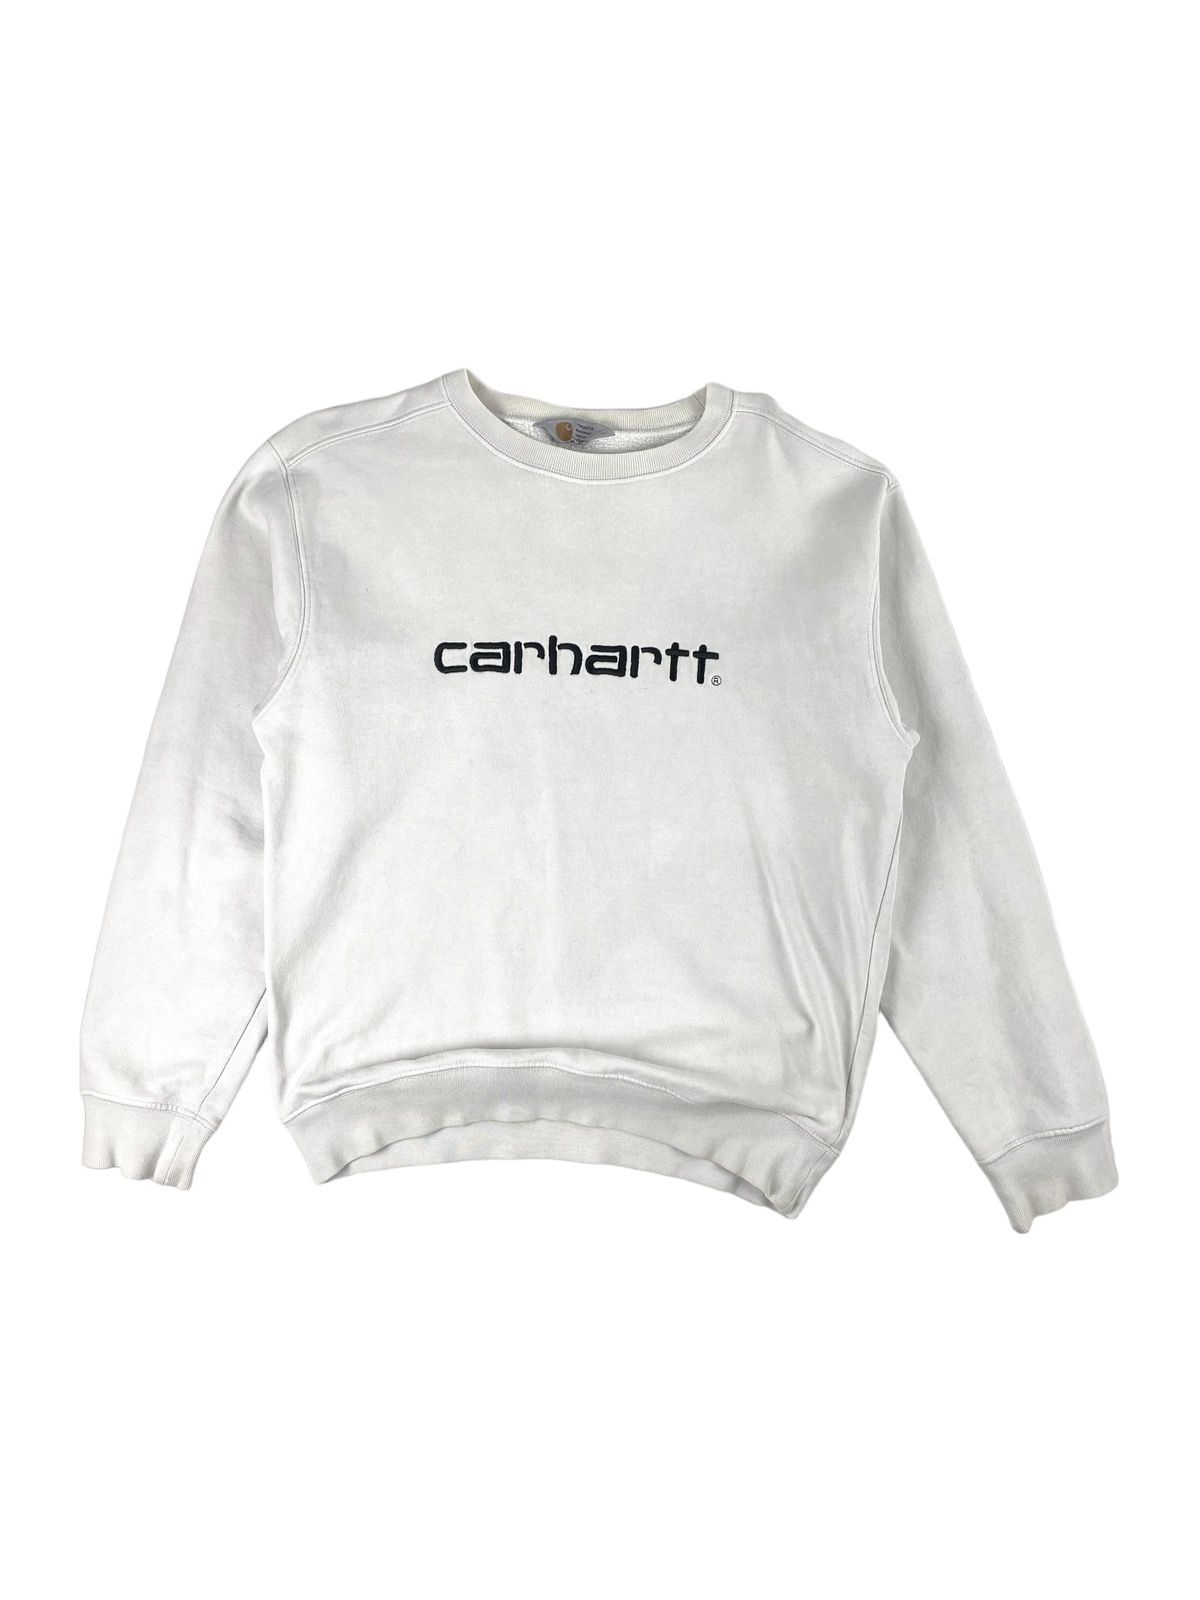 Pre-owned Carhartt X Made In Usa Carhartt Classic Logo Crewneck Sweatshirt Size L In White